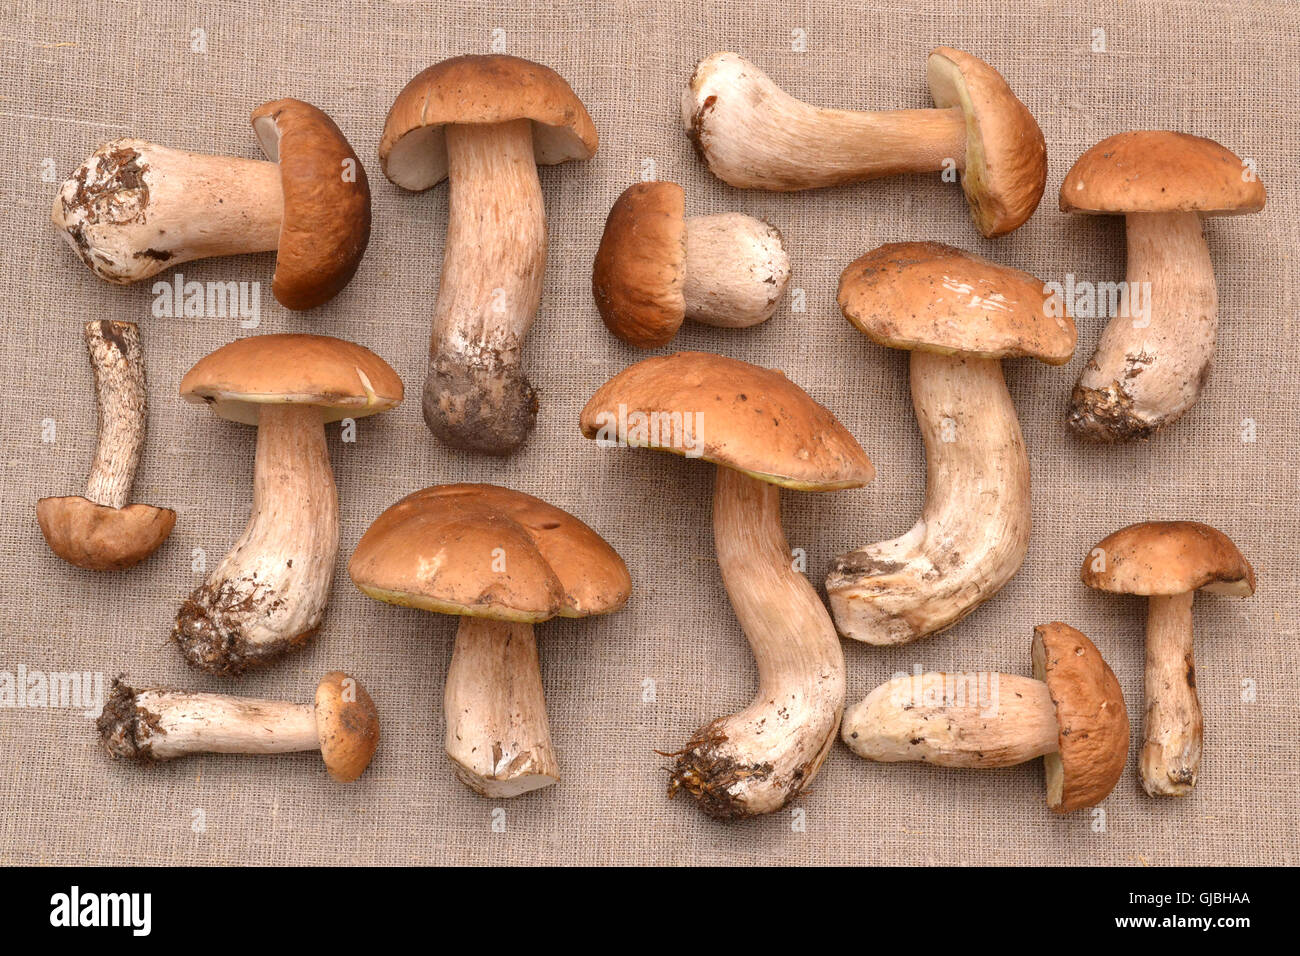 Group of porcini mushrooms on linen. The natural color and texture. Stock Photo